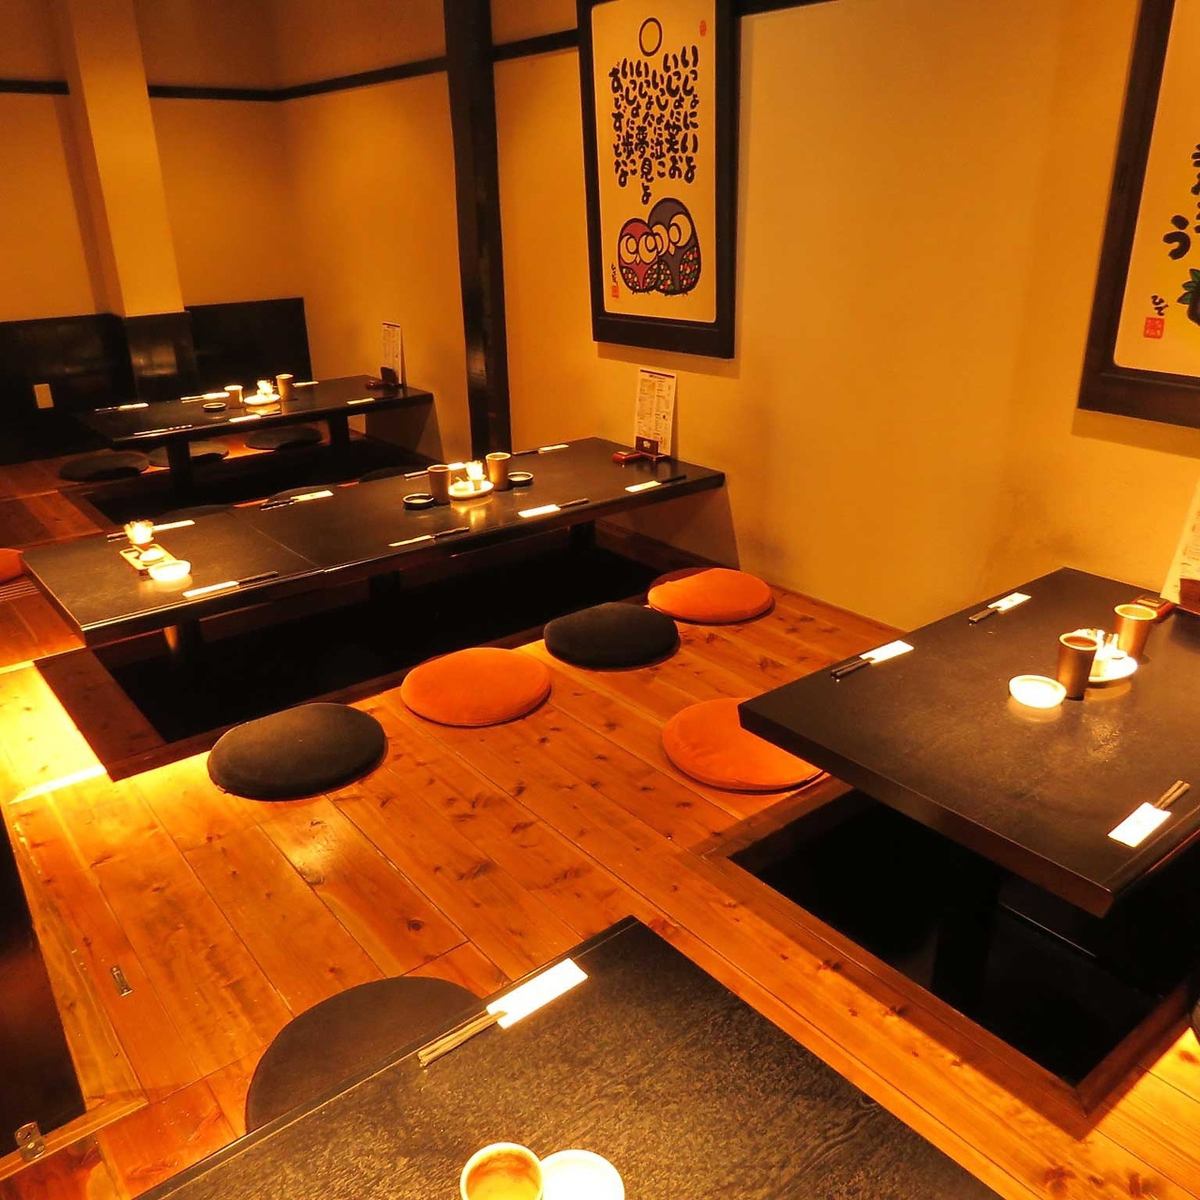 There is a private room with horigotatsu!